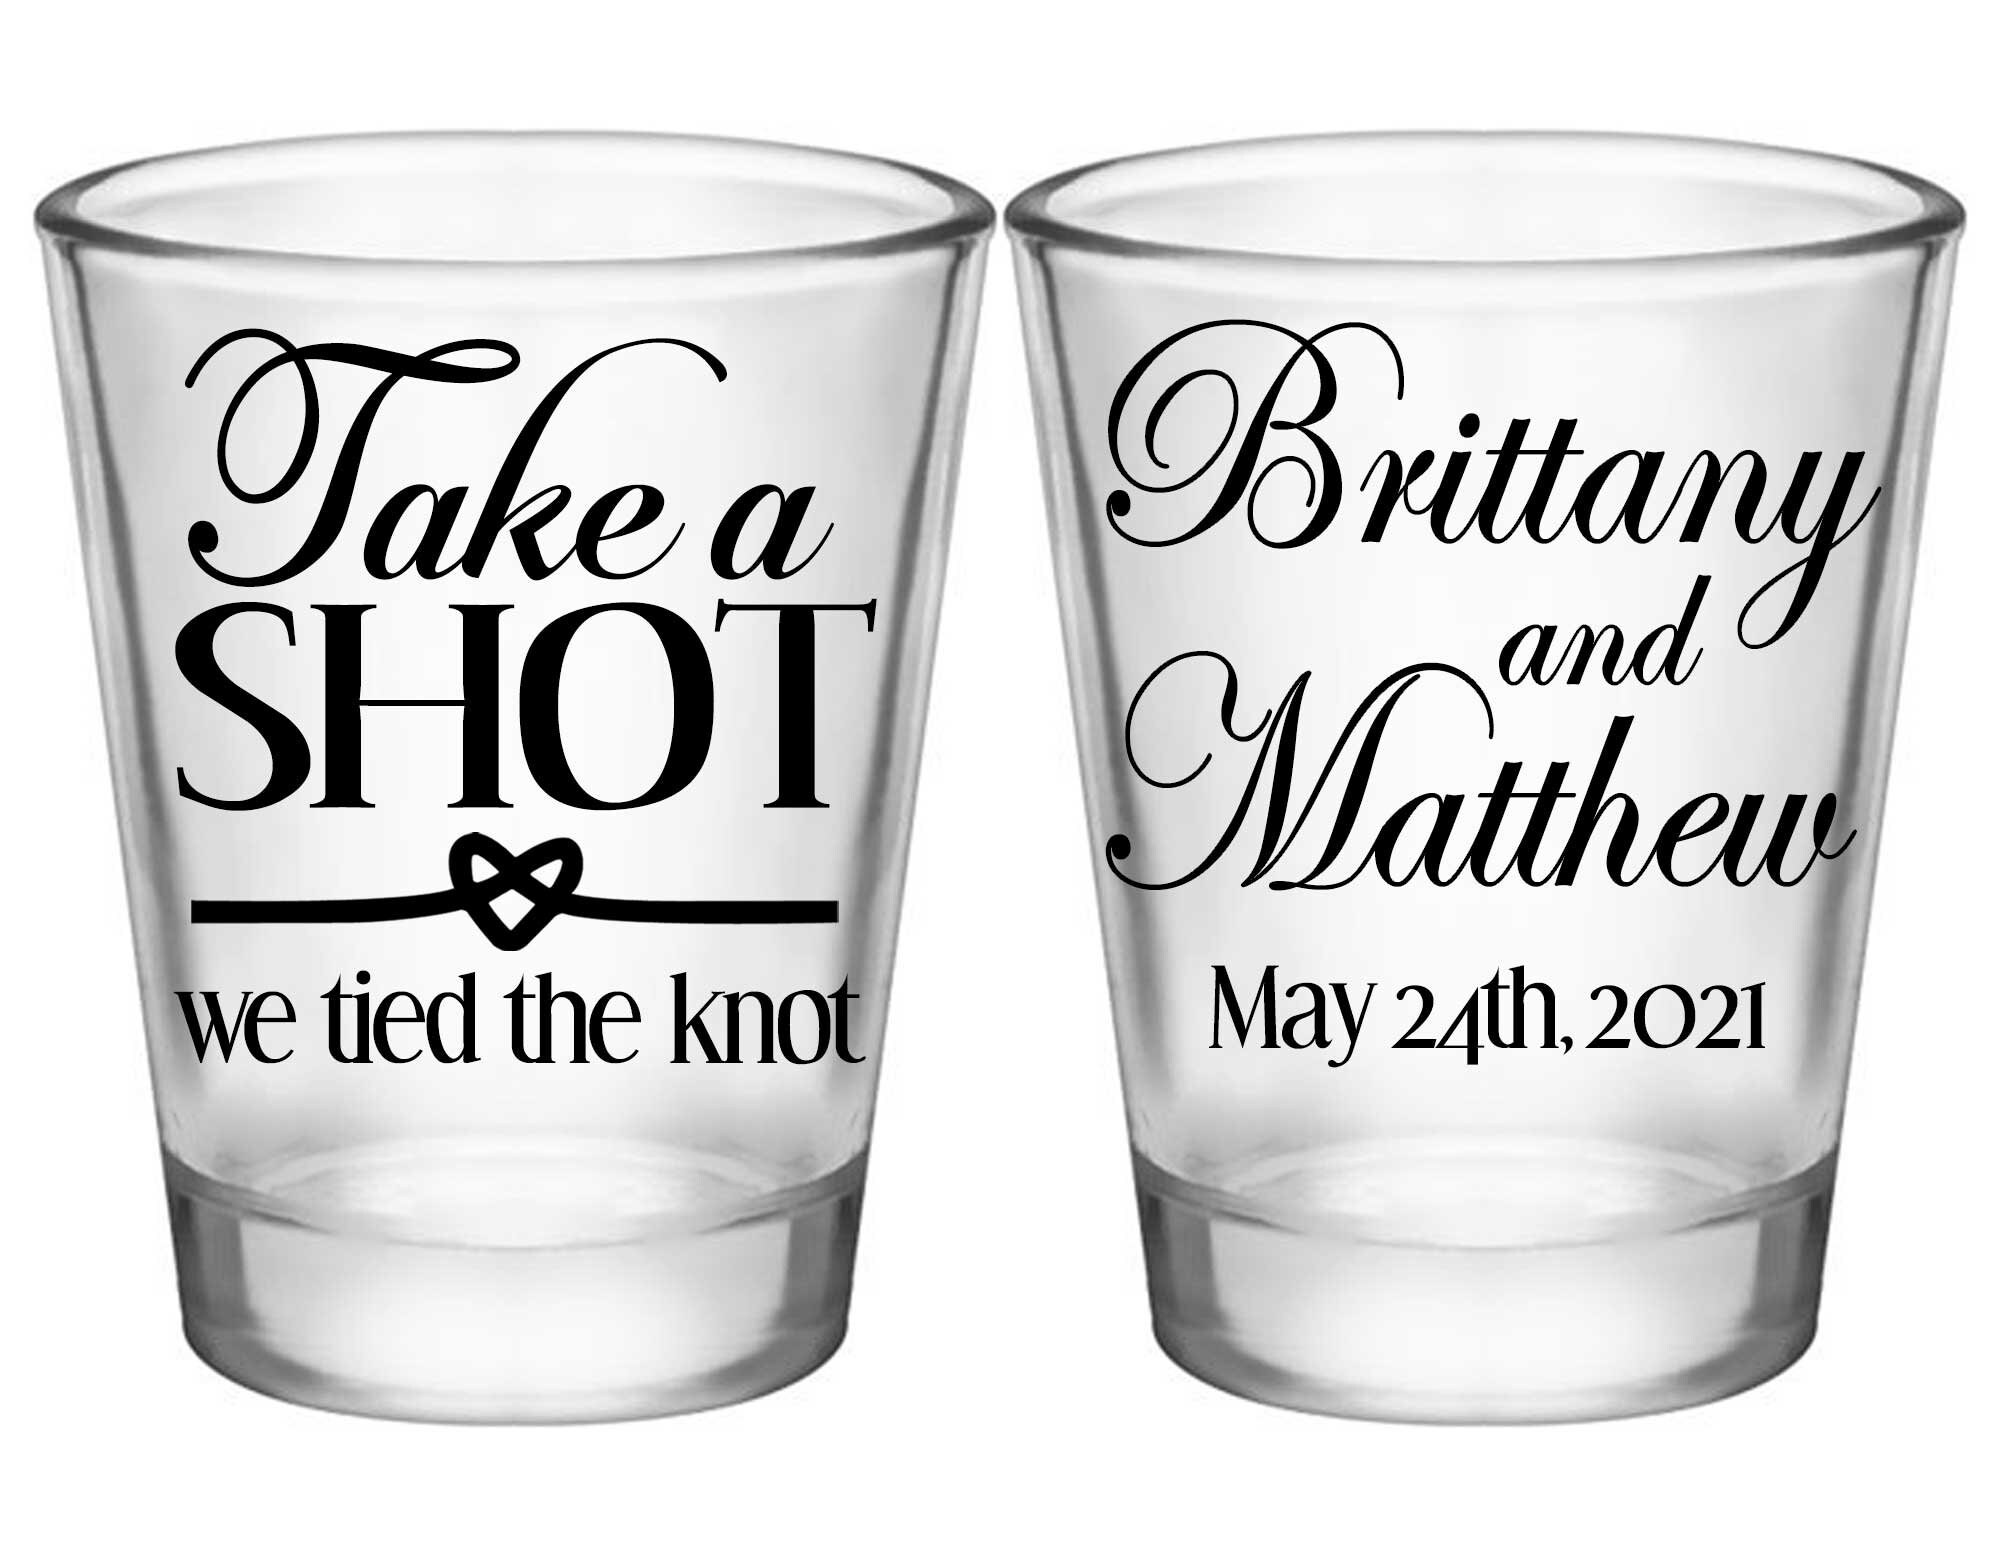 Wedding Shot Glasses Personalized Favors Gifts For Guests Nautical Take A We Tied The Knot 1A2